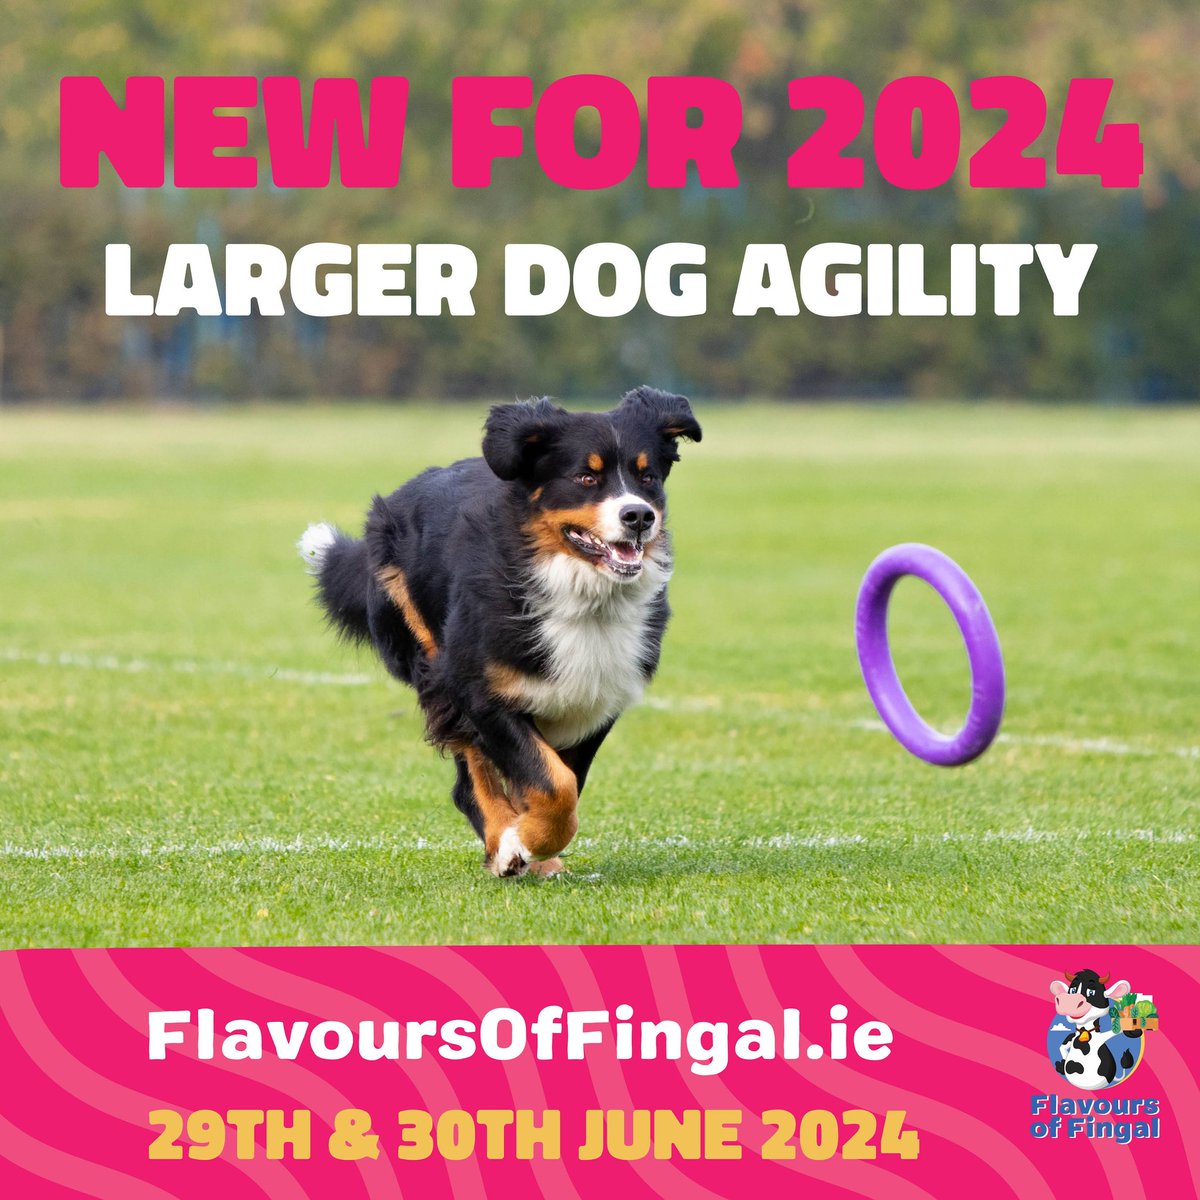 FLAVOURS OF FINGAL NEW For 2024...Larger Dog Agility Please visit the link below for more information 🐕 eventsinfingal.ie/events/flavour… @Fingalcoco